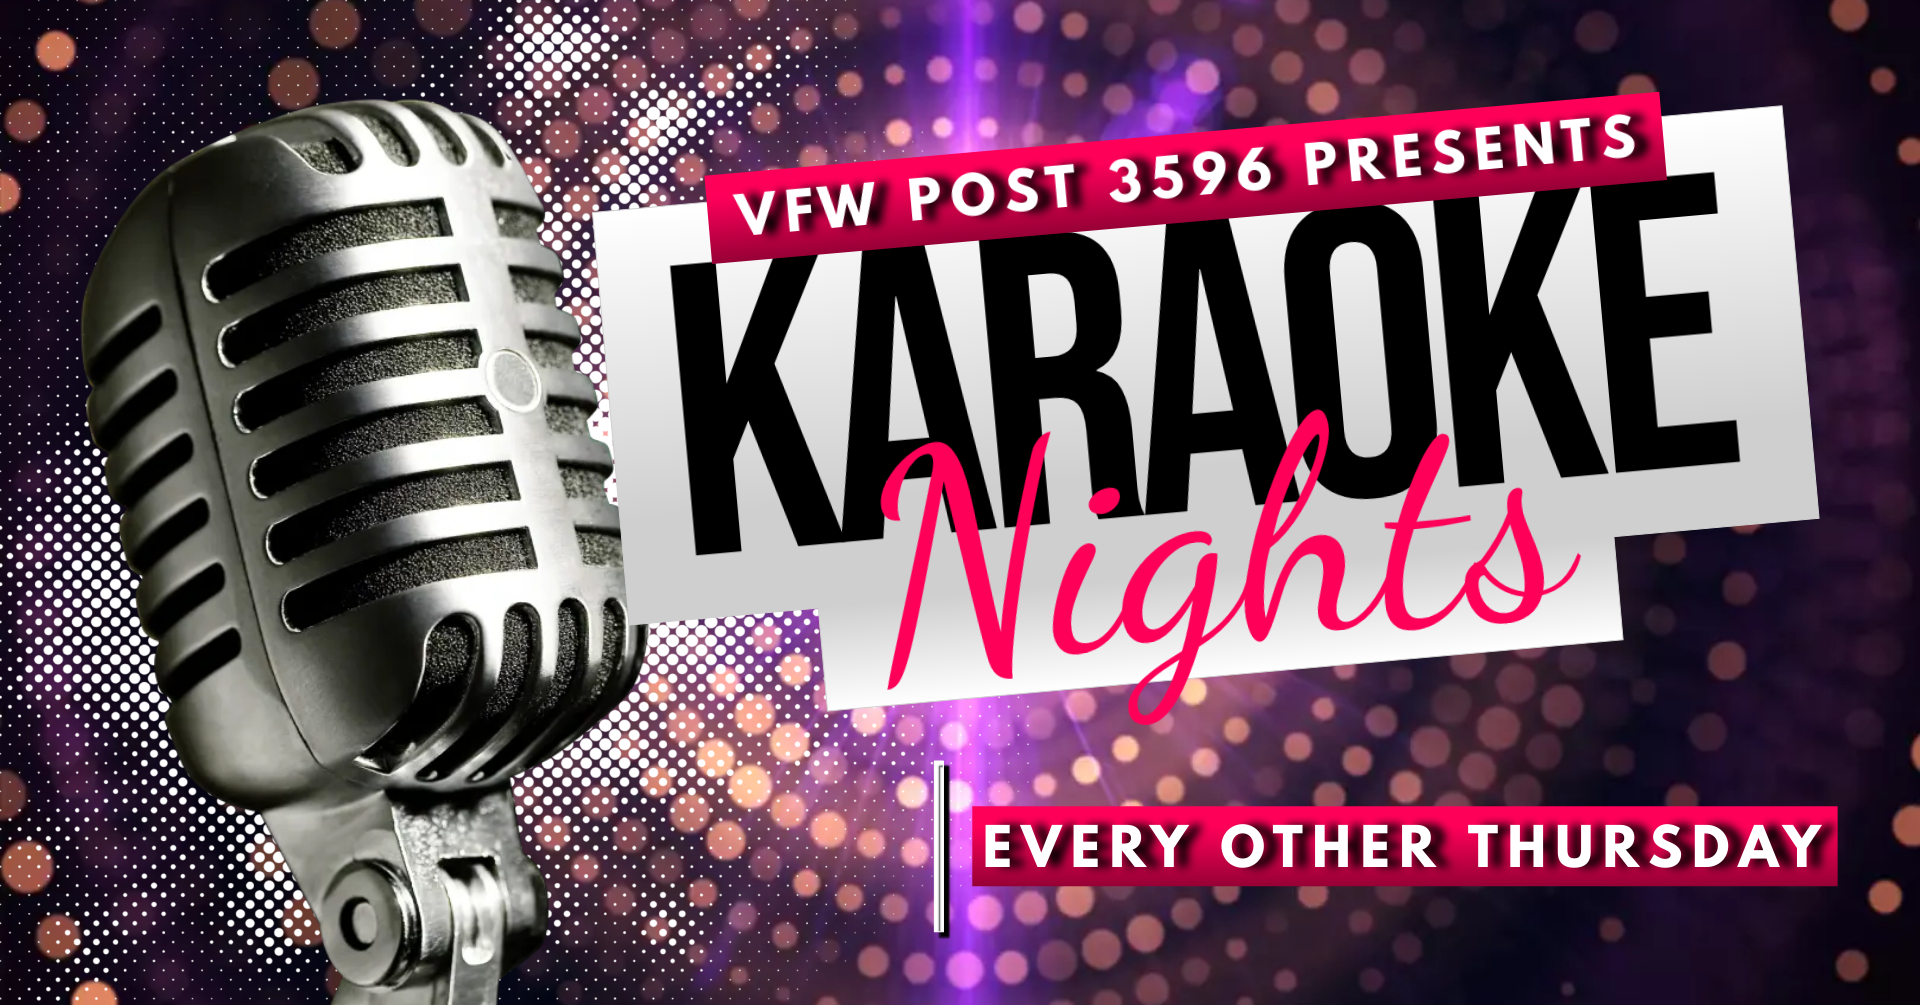 Karaoke (every other) Thursday Night 7:00 pm to 10:00 pm at VFW Post 3596 in Plains, Montana